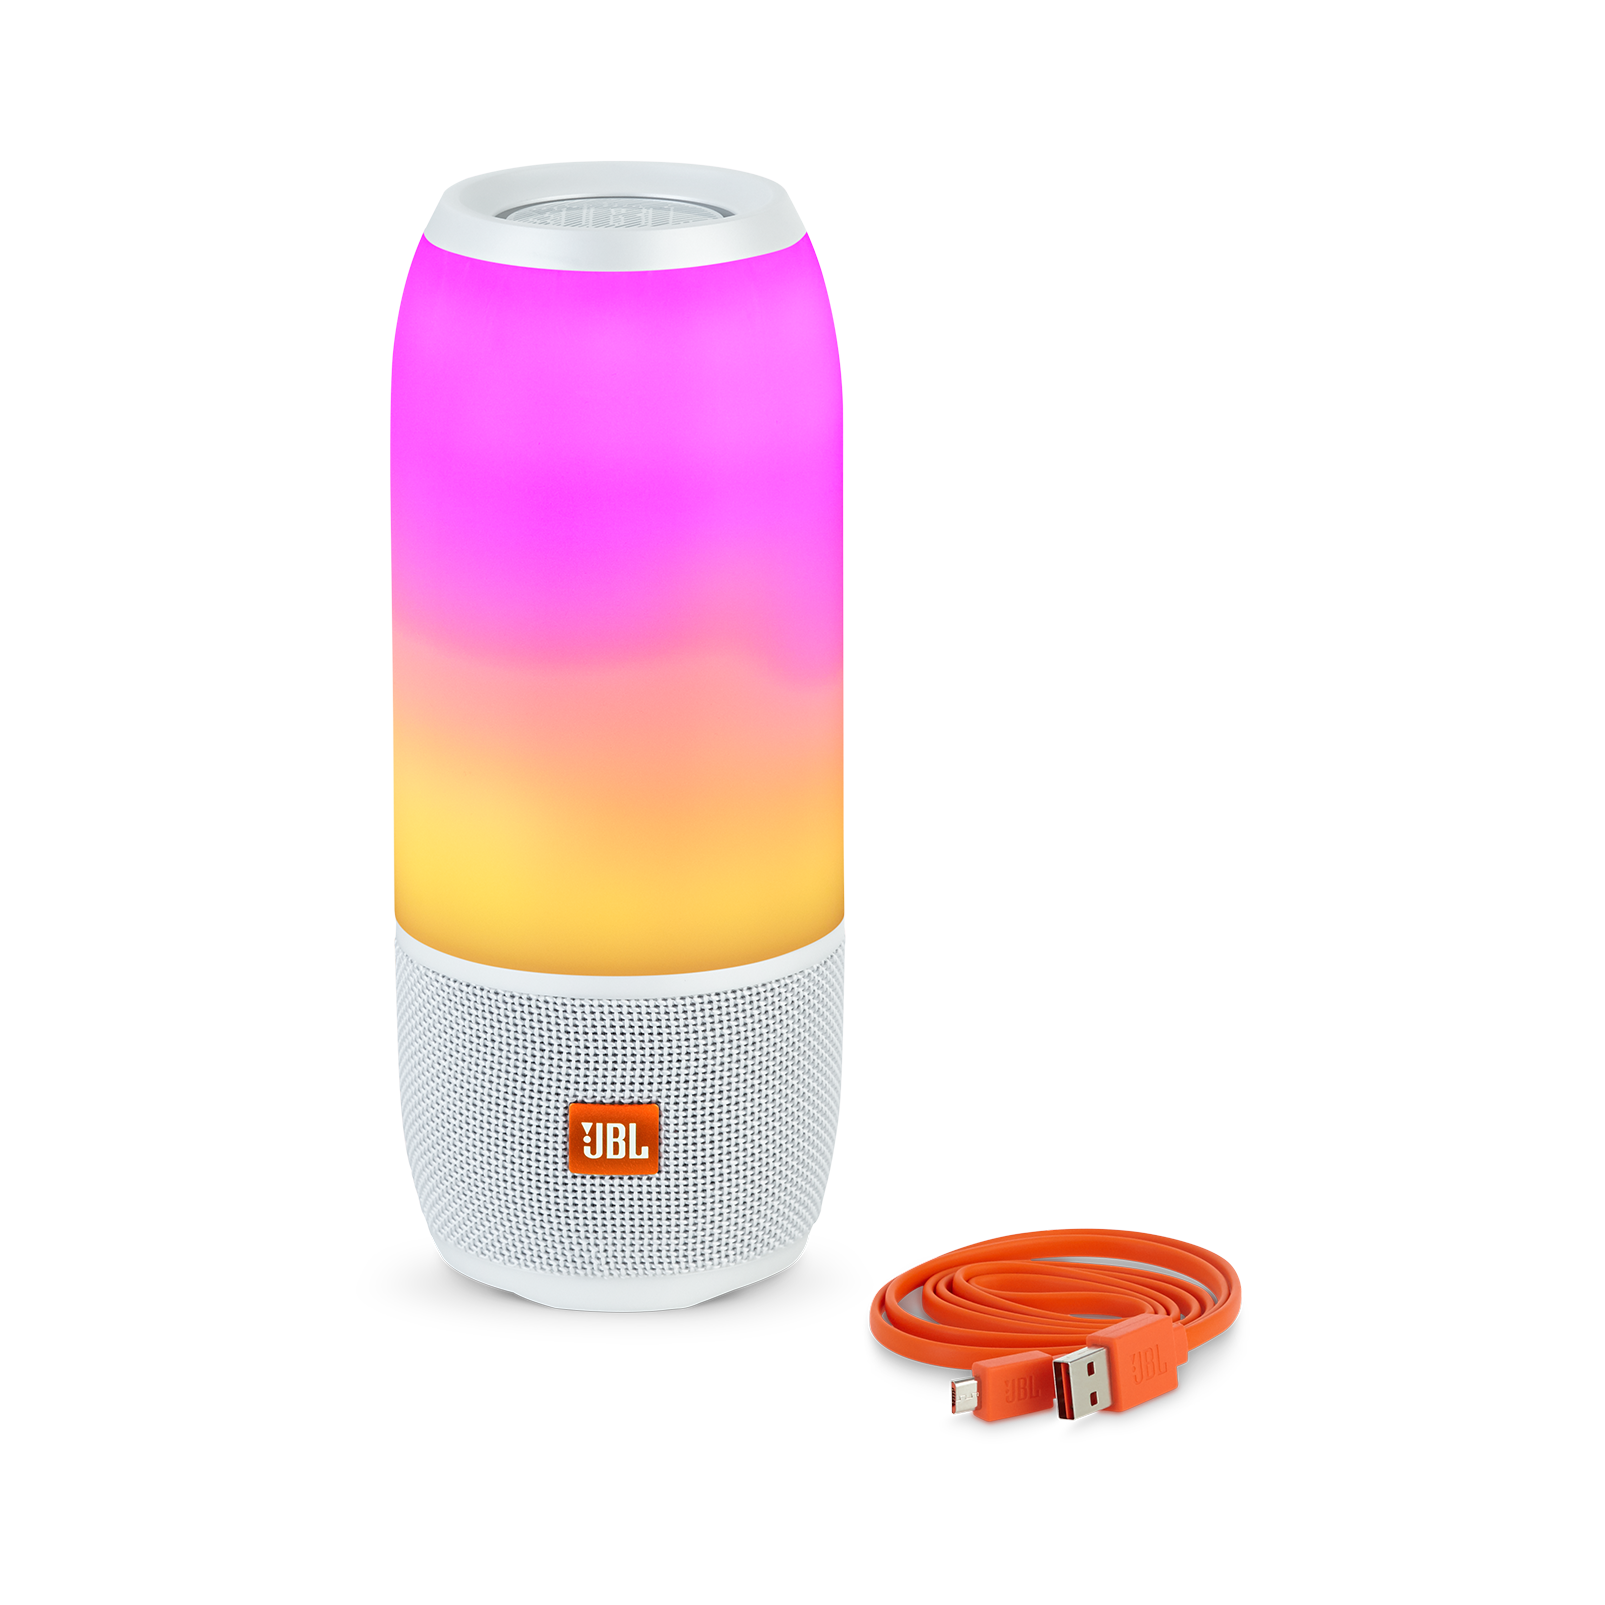 JBL Pulse 3 - White - Waterproof portable Bluetooth speaker with 360° lightshow and sound. - Detailshot 2